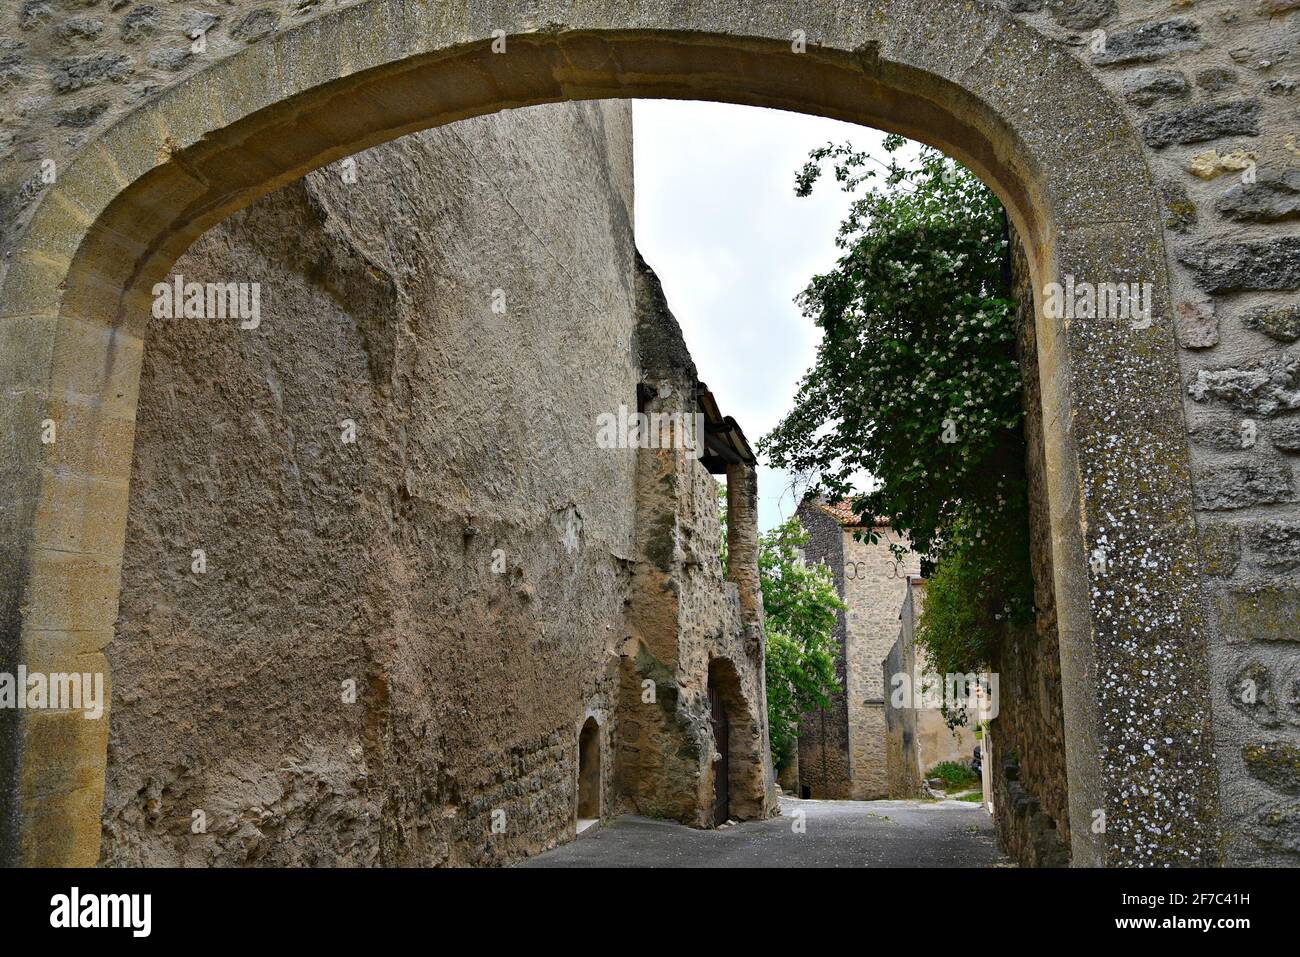 Scenic view of the stone arched, covered passage 'Knight Templars' in the picturesque village of Grambois Provence-Alpes-Côte d'Azur, Vaucluse, France Stock Photo